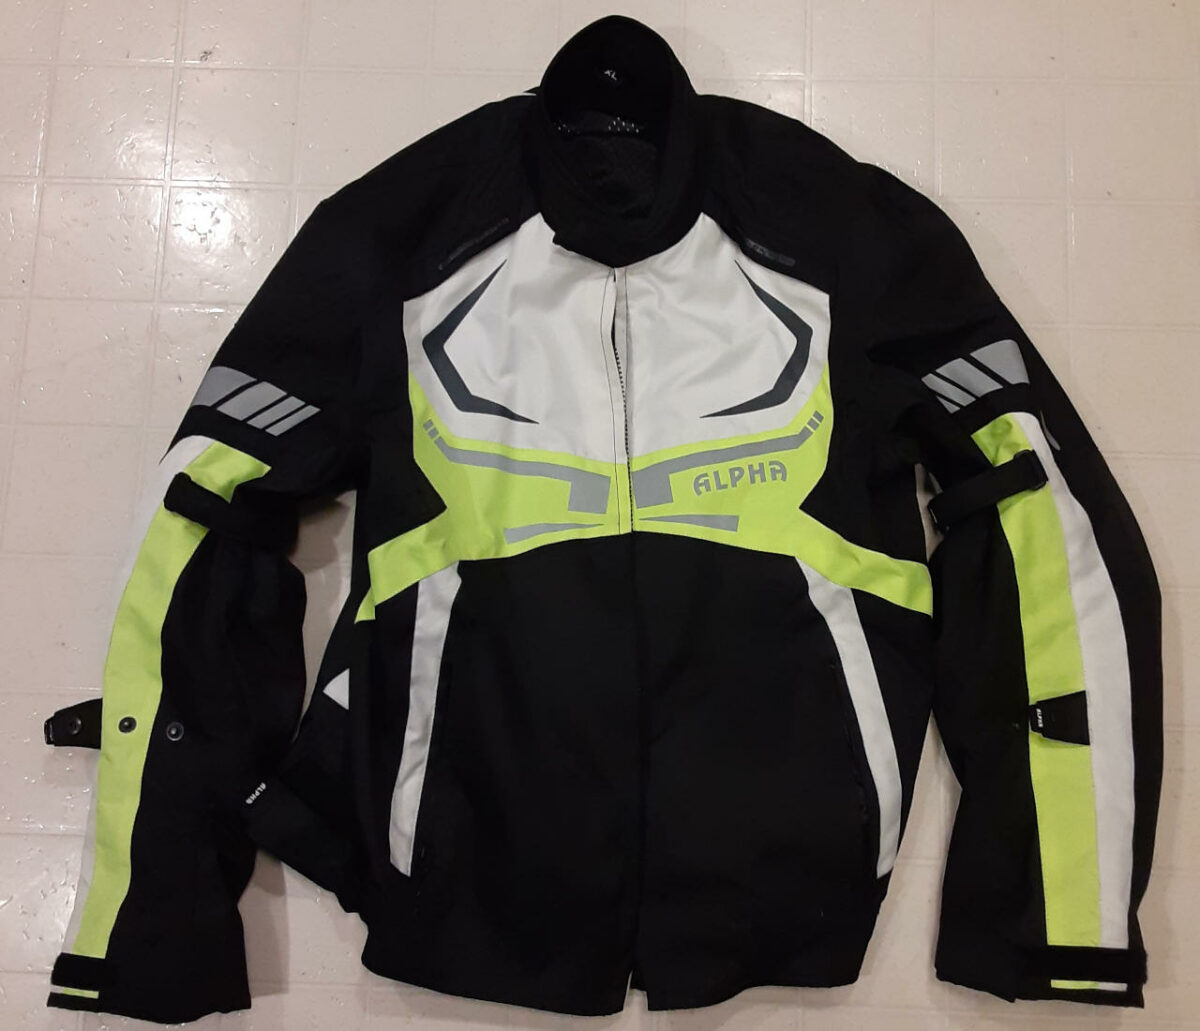 Wear A Motorcycle Jacket All The Time? - My Alpha Motorcycle Riding Jacket.